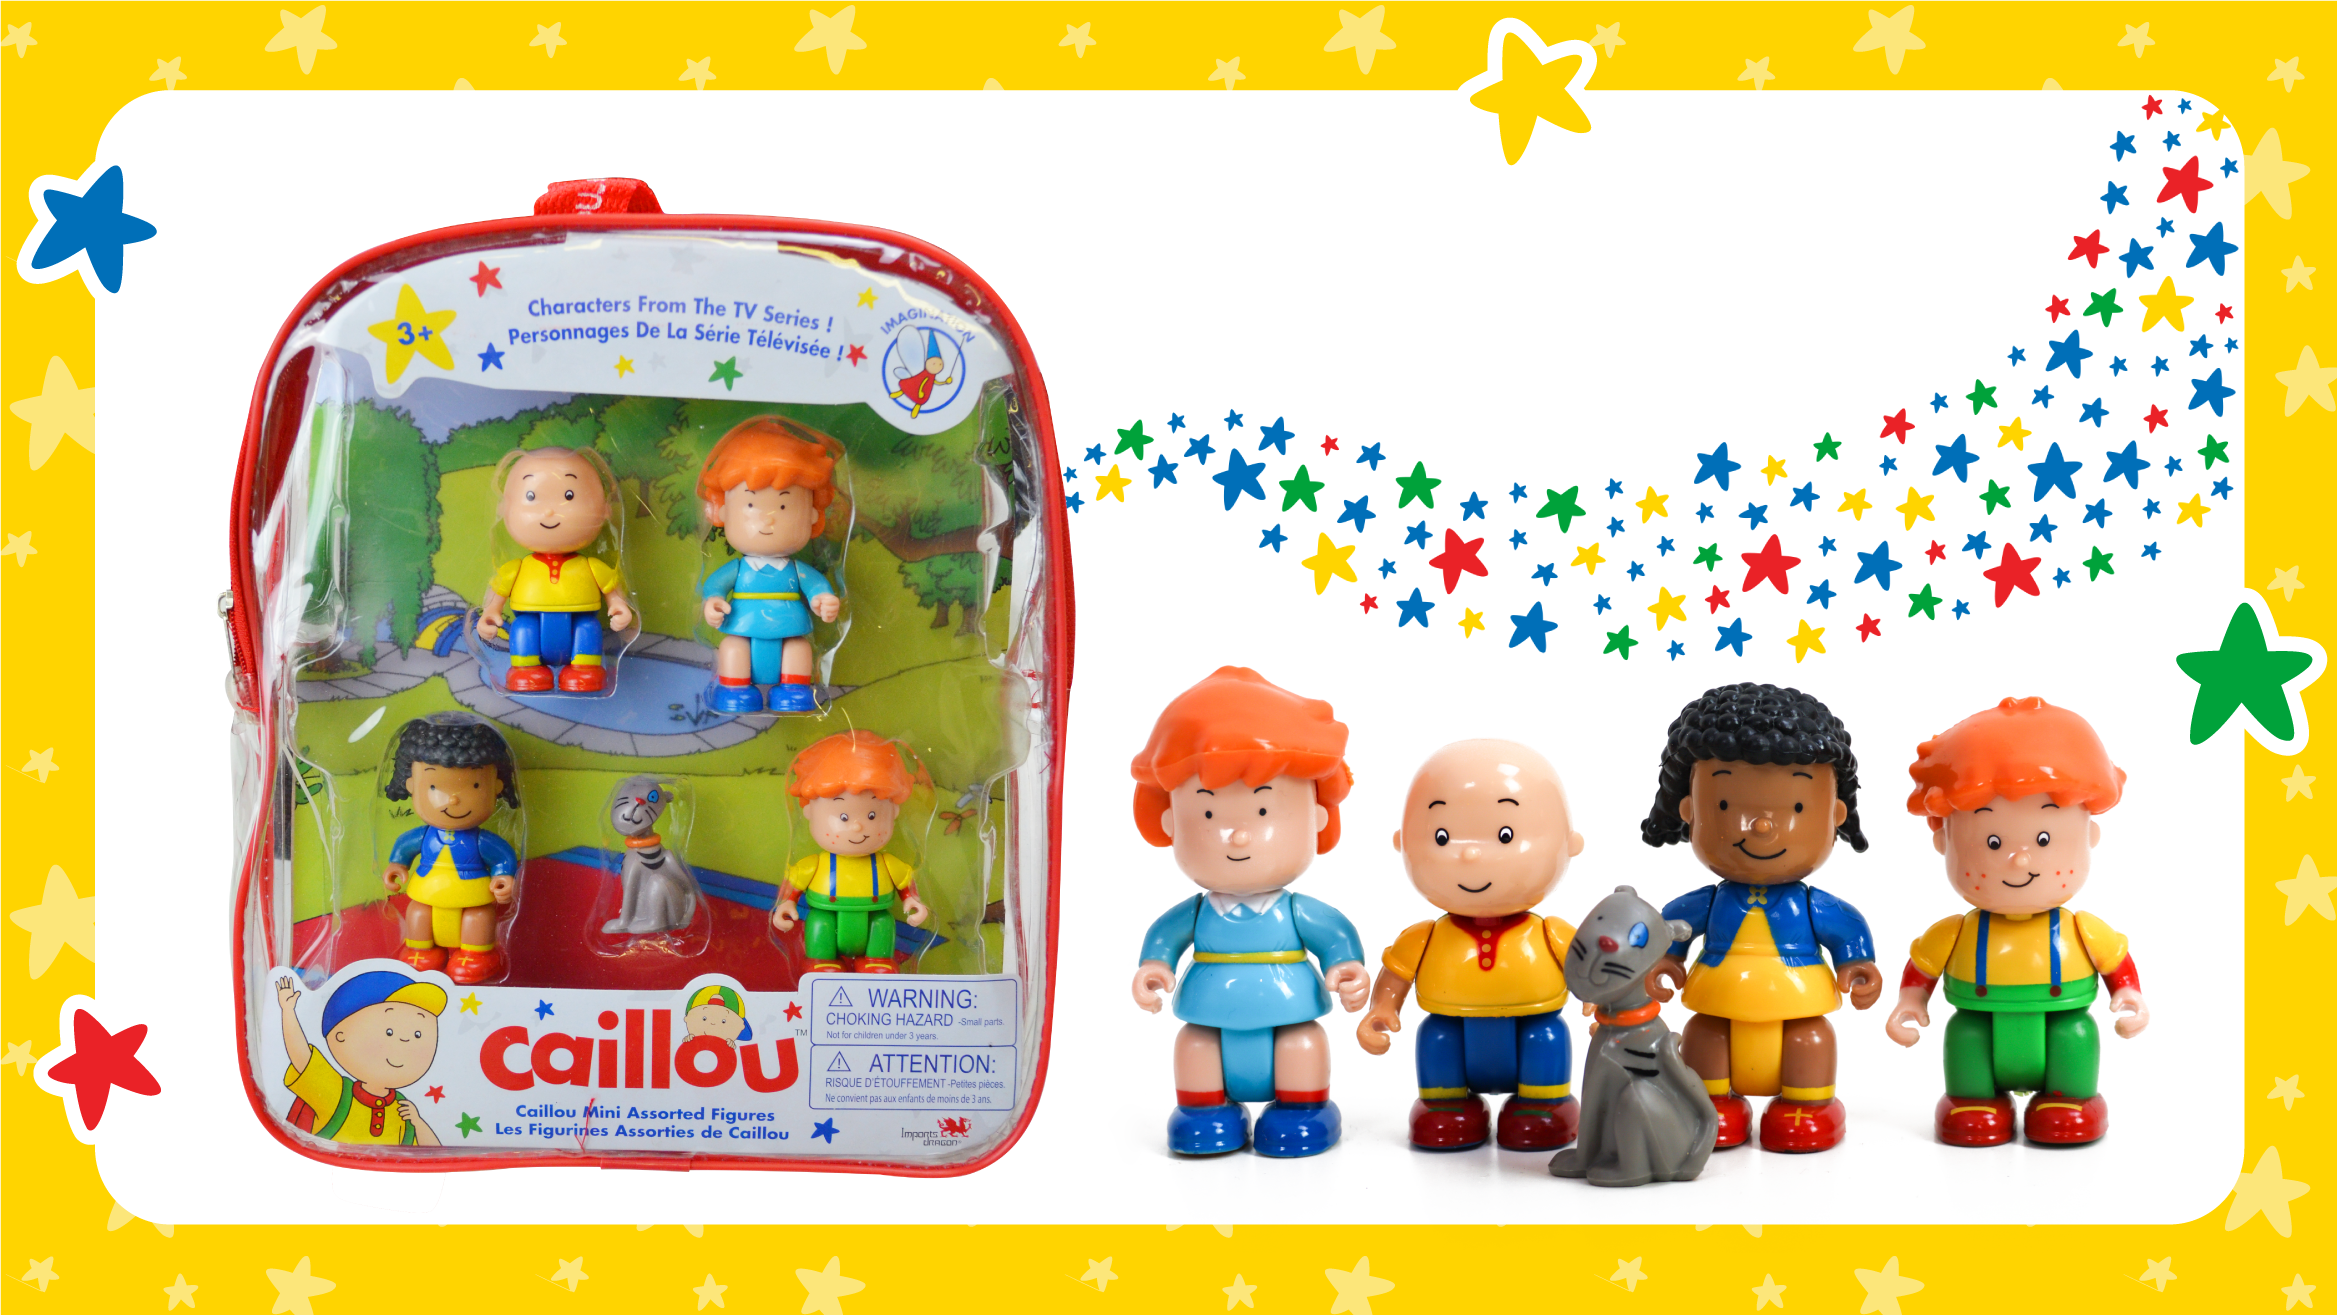 Caillou Mini Backpack with Figures Now Available in the UK! 🇬🇧 post image